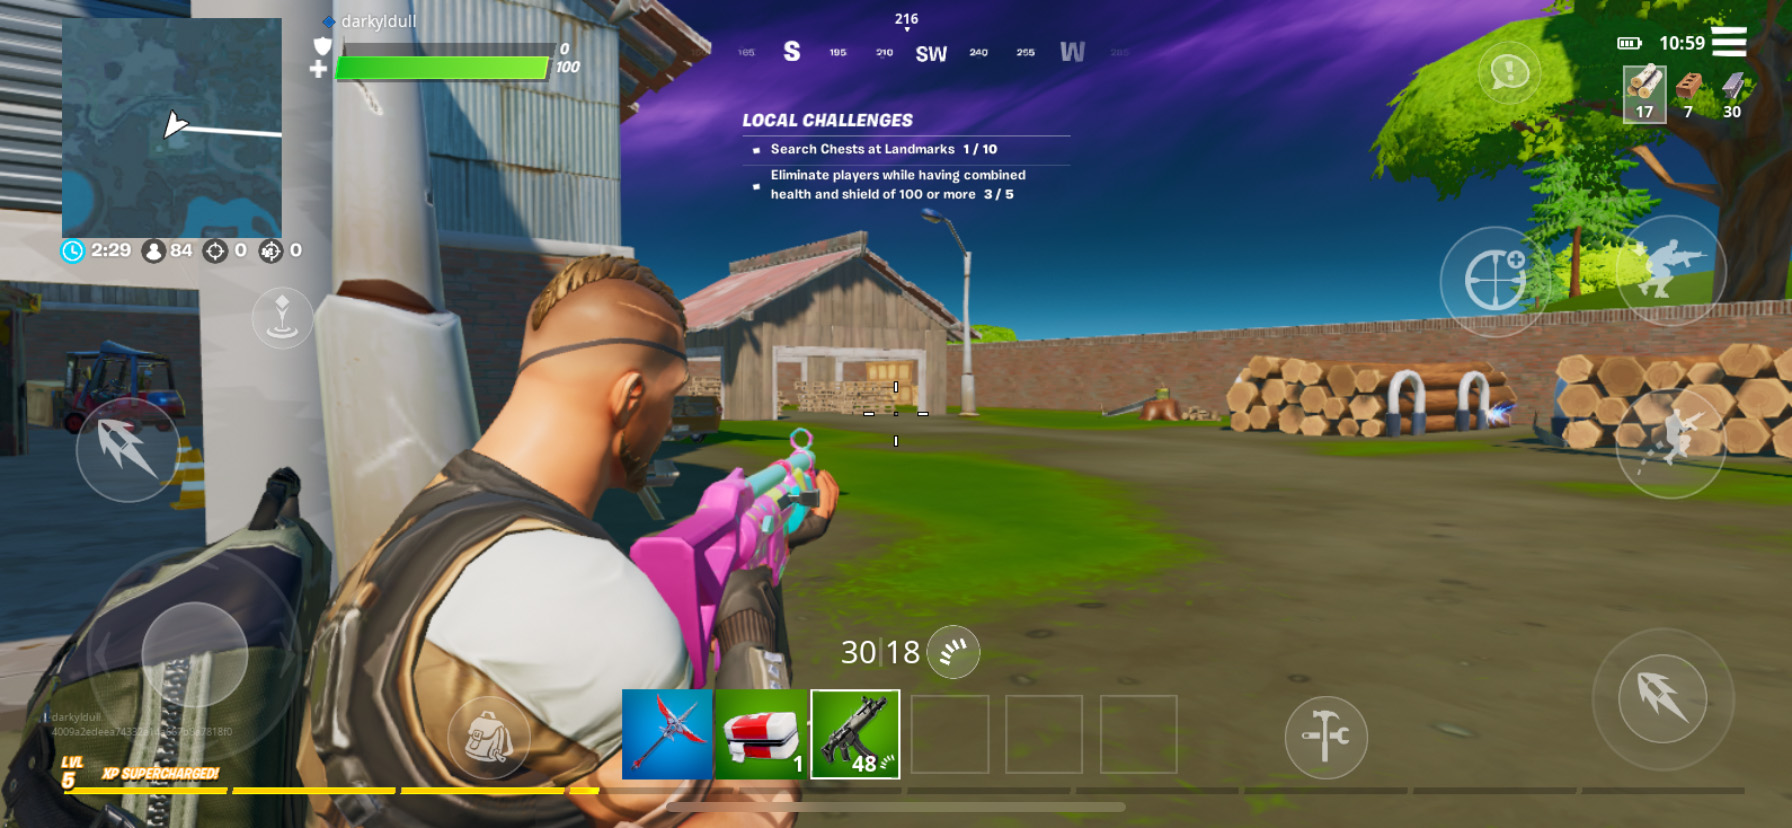 Unloading A Weapon In Fortnite Fortnite Mobile A Guide On The Different Weapon Types Bluestacks